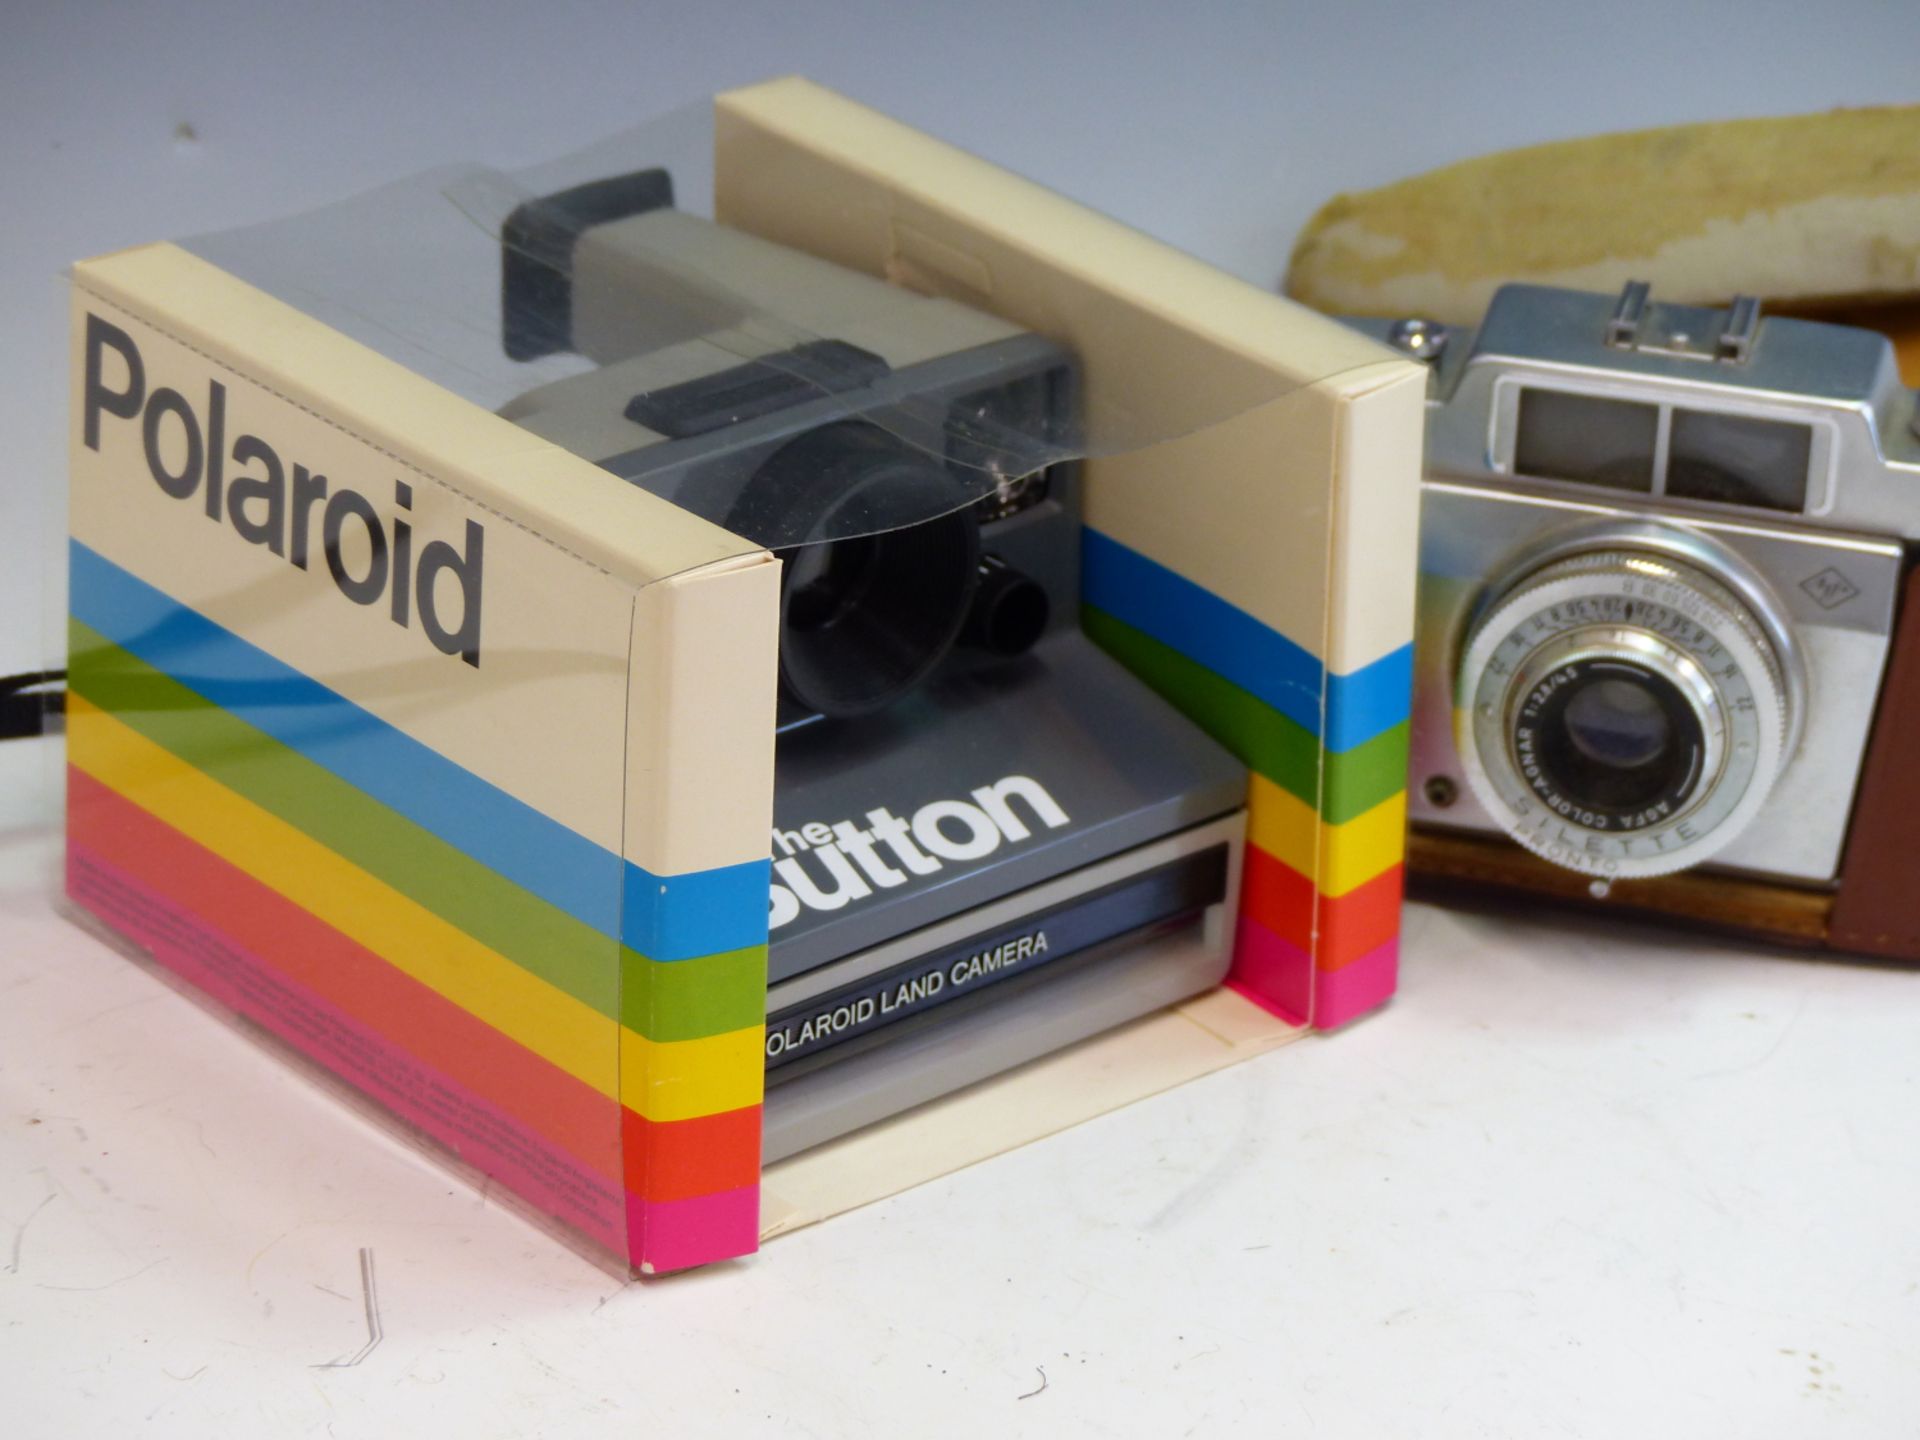 A POLAROID LAND CAMERA "THE BUTTON" IN ORIGINAL PACKAGING WITH MANUAL. TOGETHER WITH AN AGFA SILETTE - Image 2 of 3